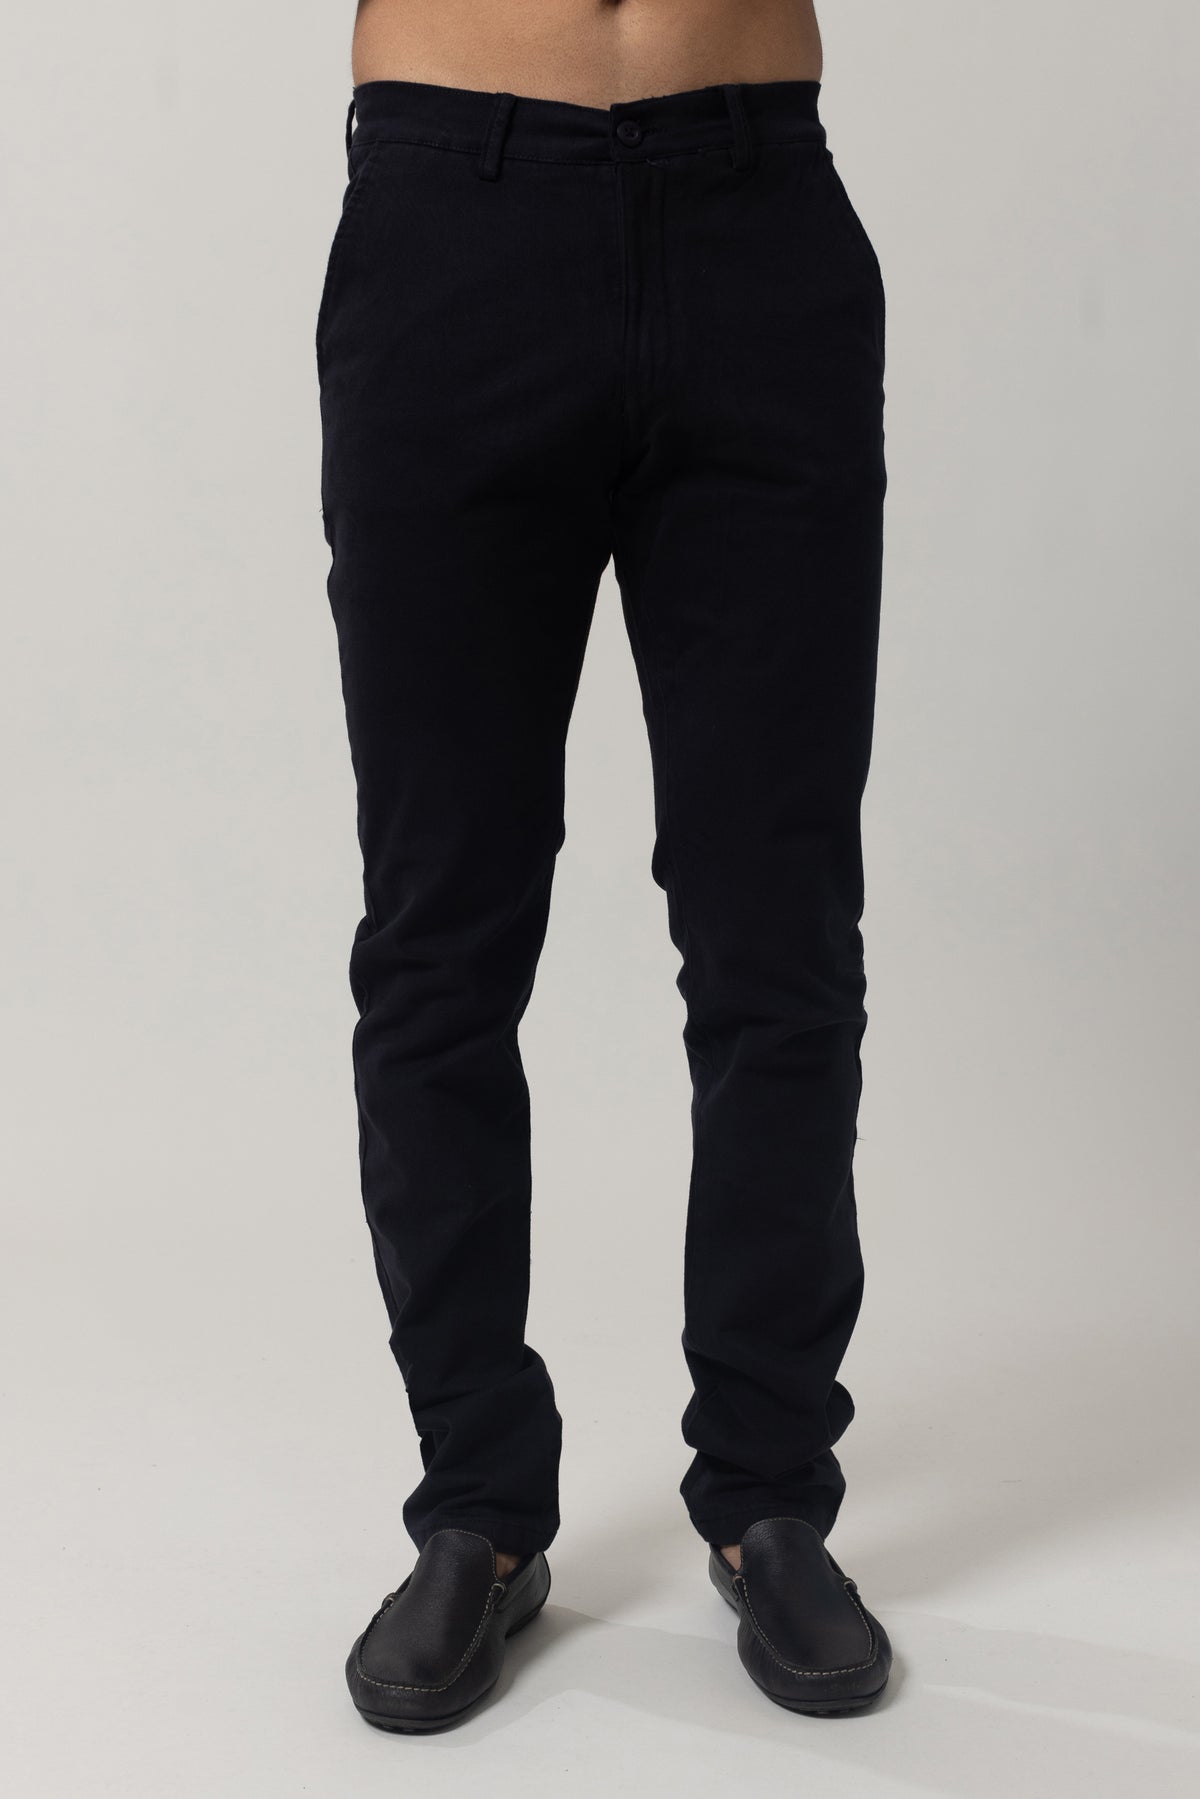 Plain Twill Cotton Pants with Lycra - Slim - Charcoal